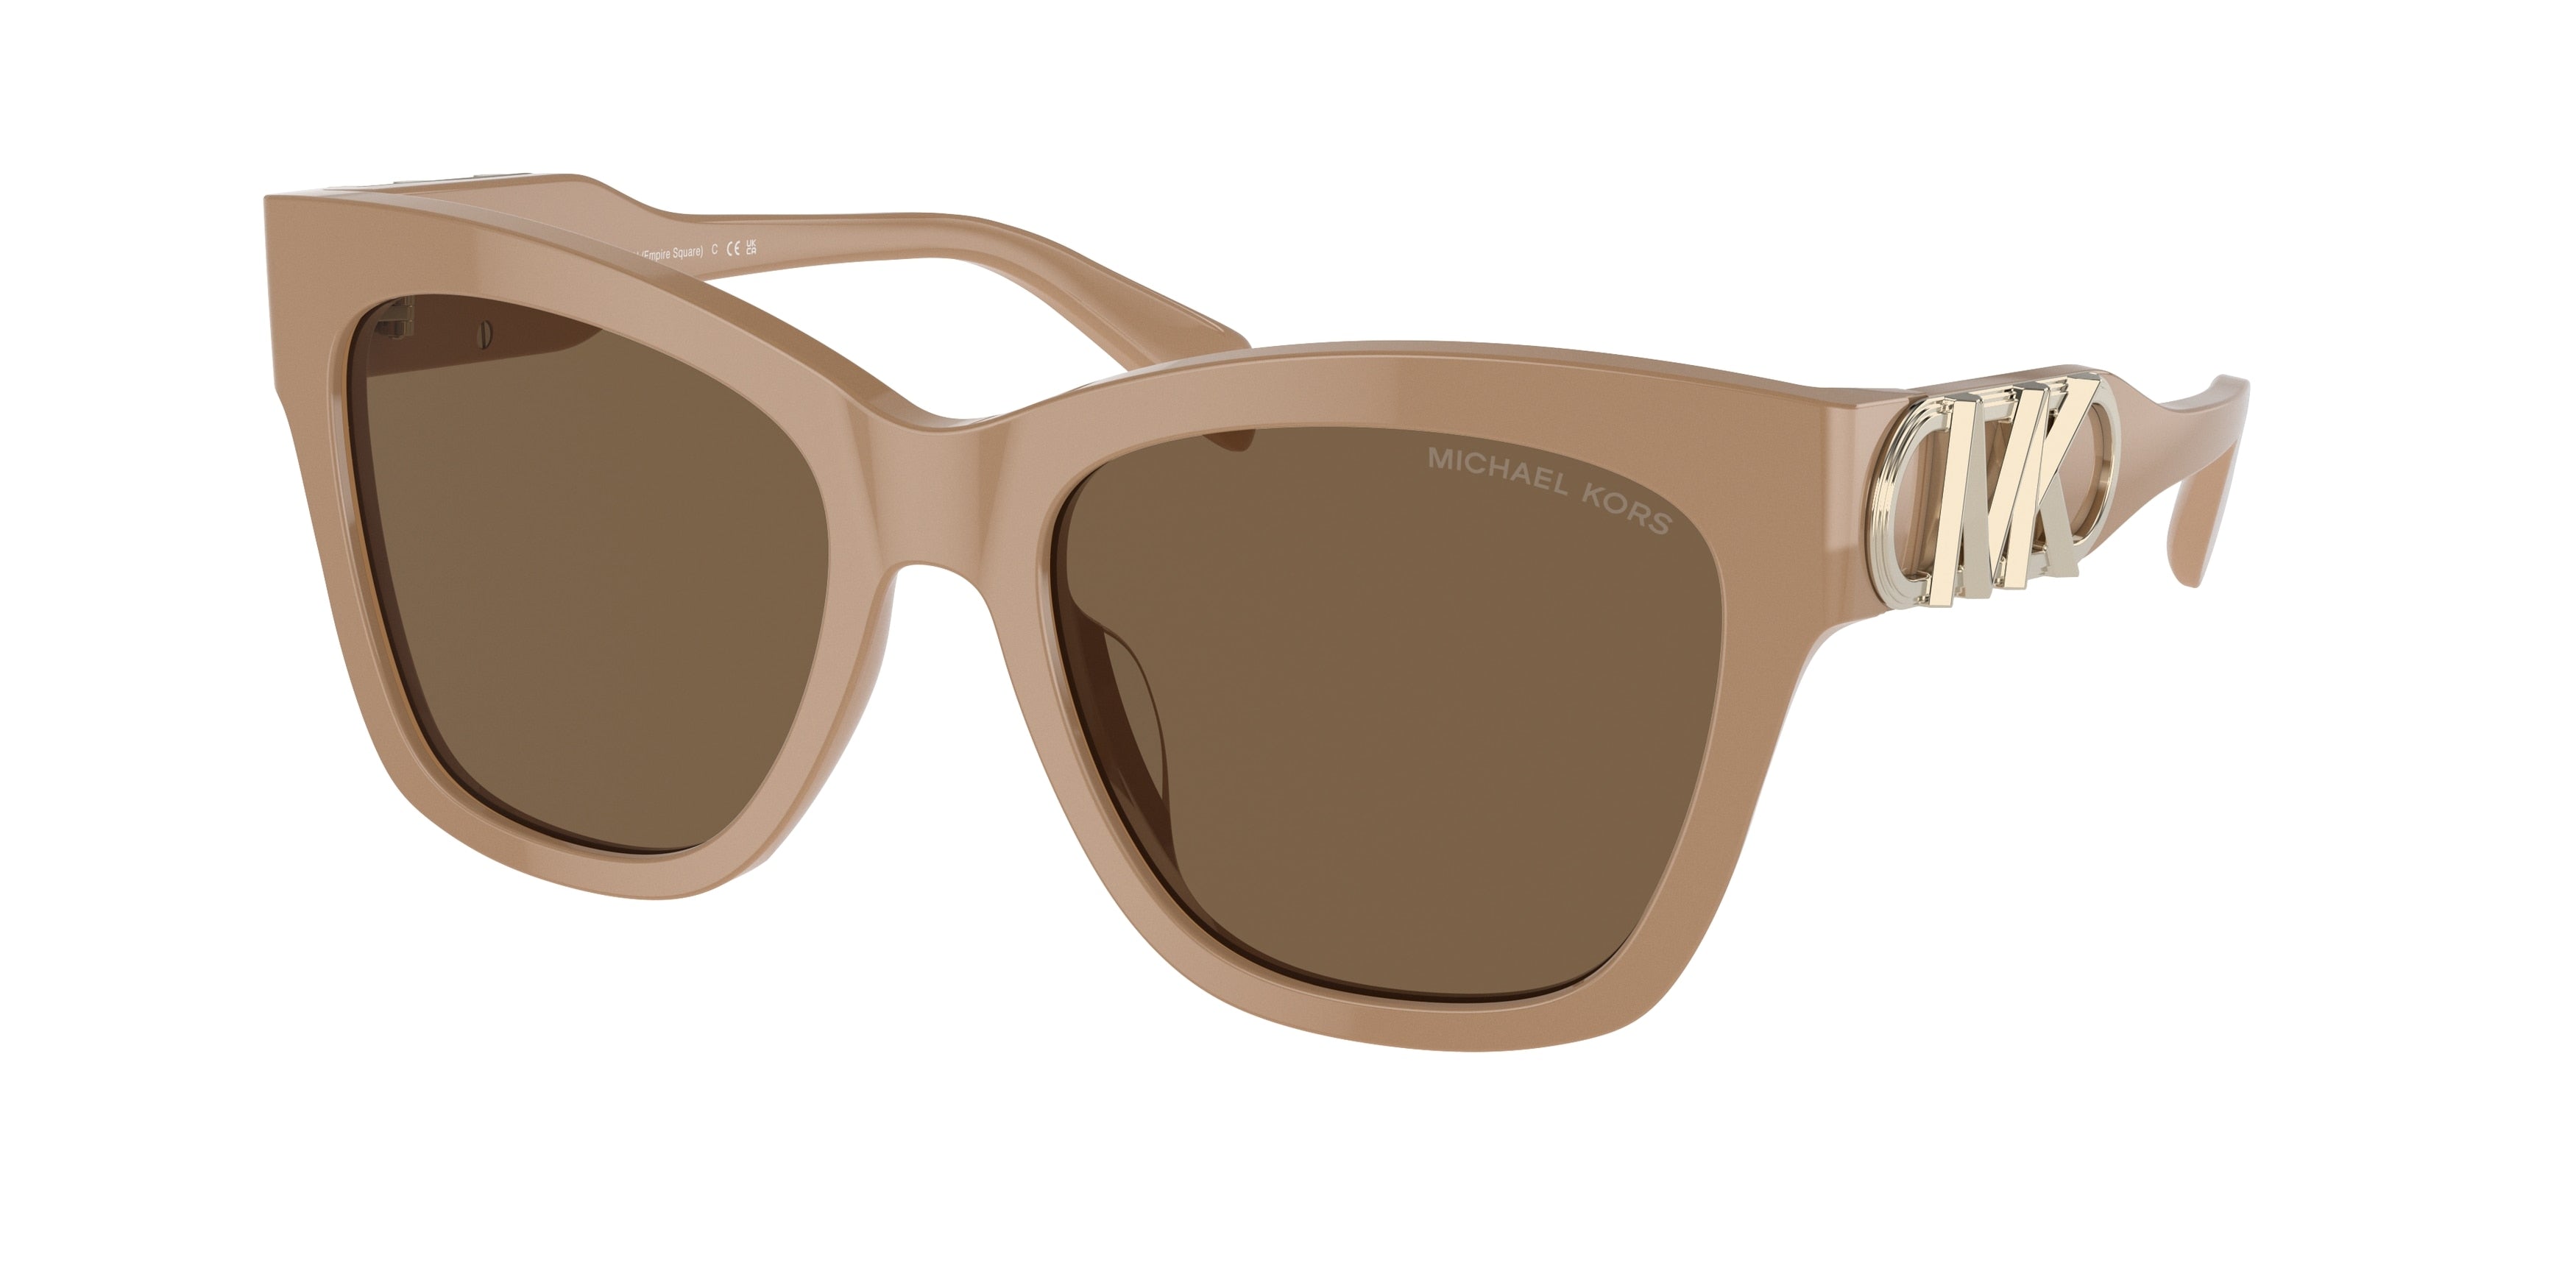 Michael Kors EMPIRE SQUARE MK2182U Butterfly Sunglasses  355573-Camel Solid 55-140-18 - Color Map Brown